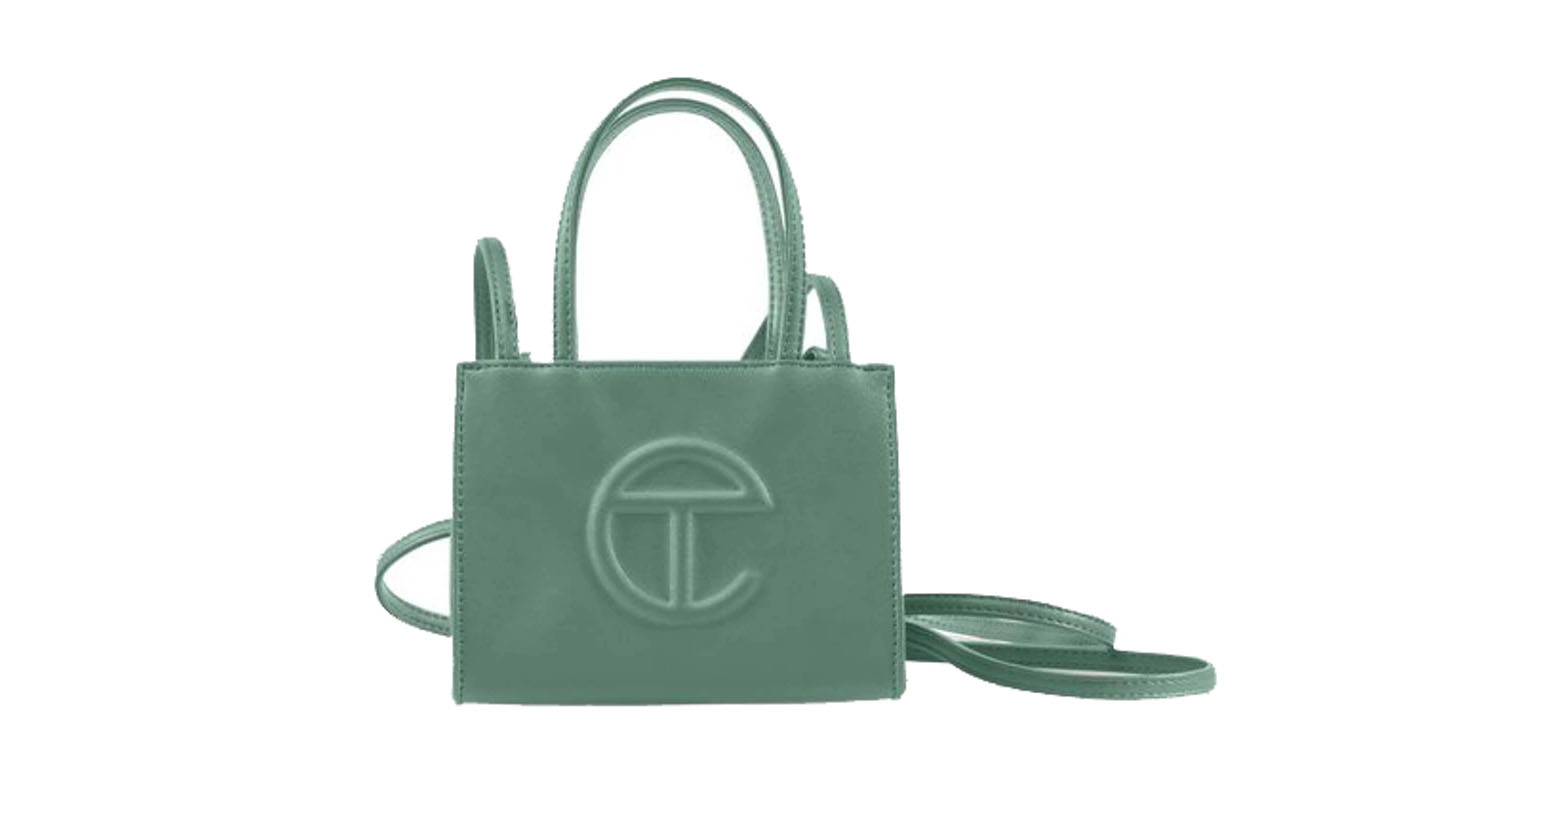 Telfar Bags Are Now In the Pandemic Fashion Canon